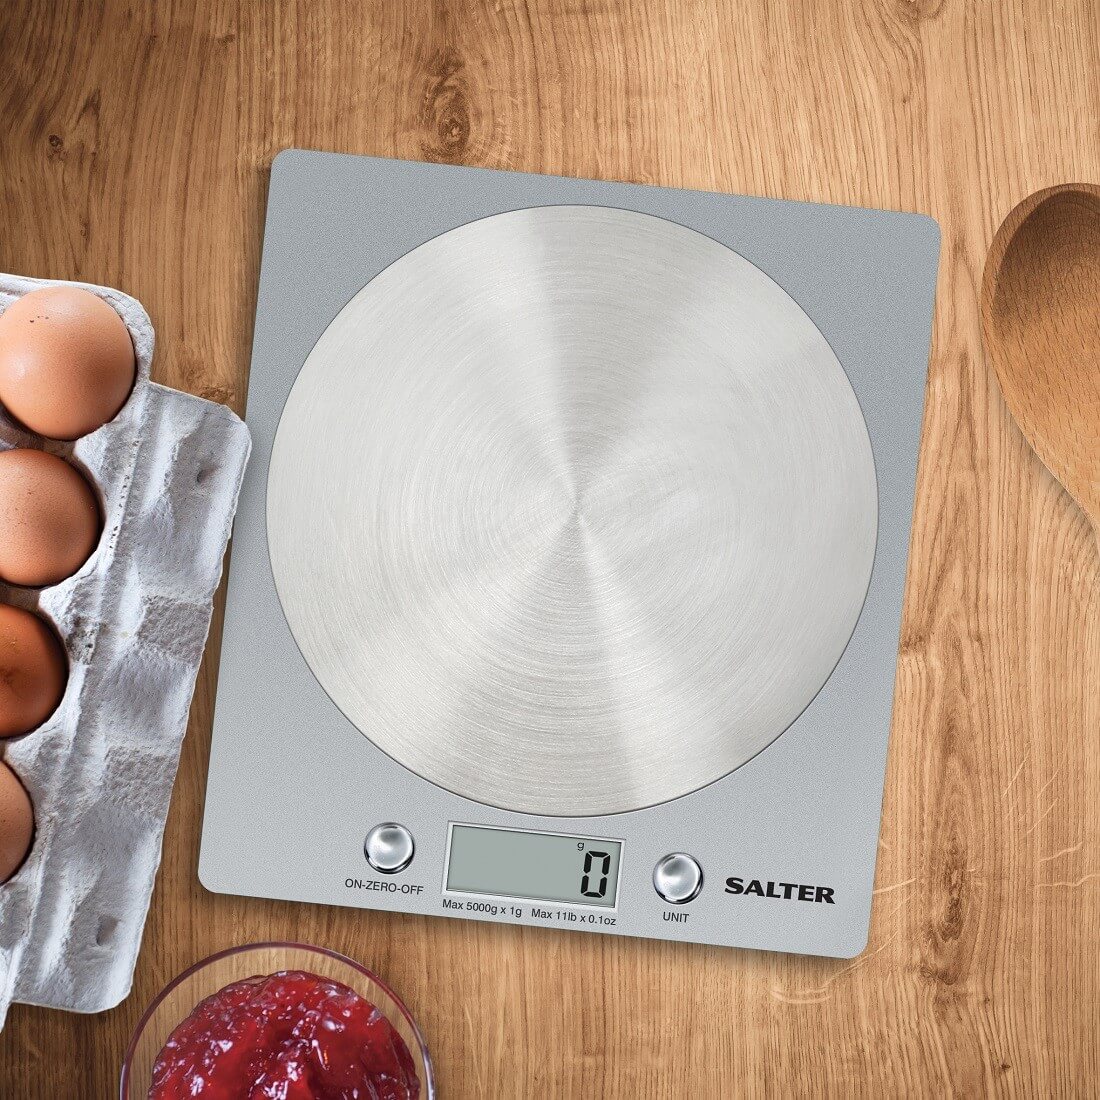 Salter Disc Electronic Digital Kitchen Scales Silver